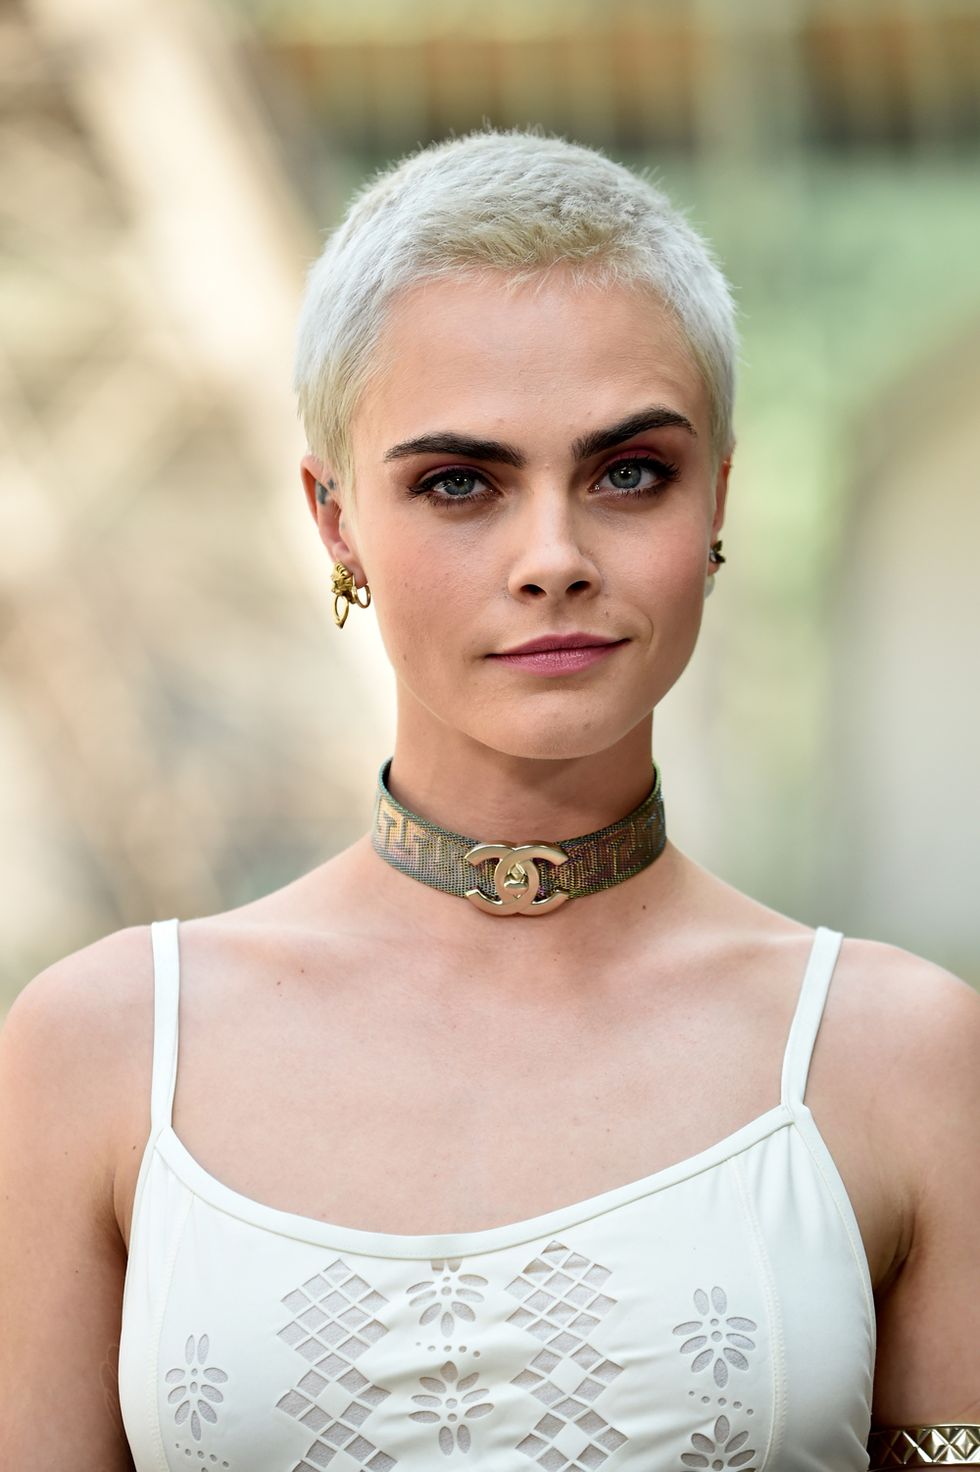 19 Best Pixie Cuts of 2019 - Celebrity Pixie Hairstyle Ideas